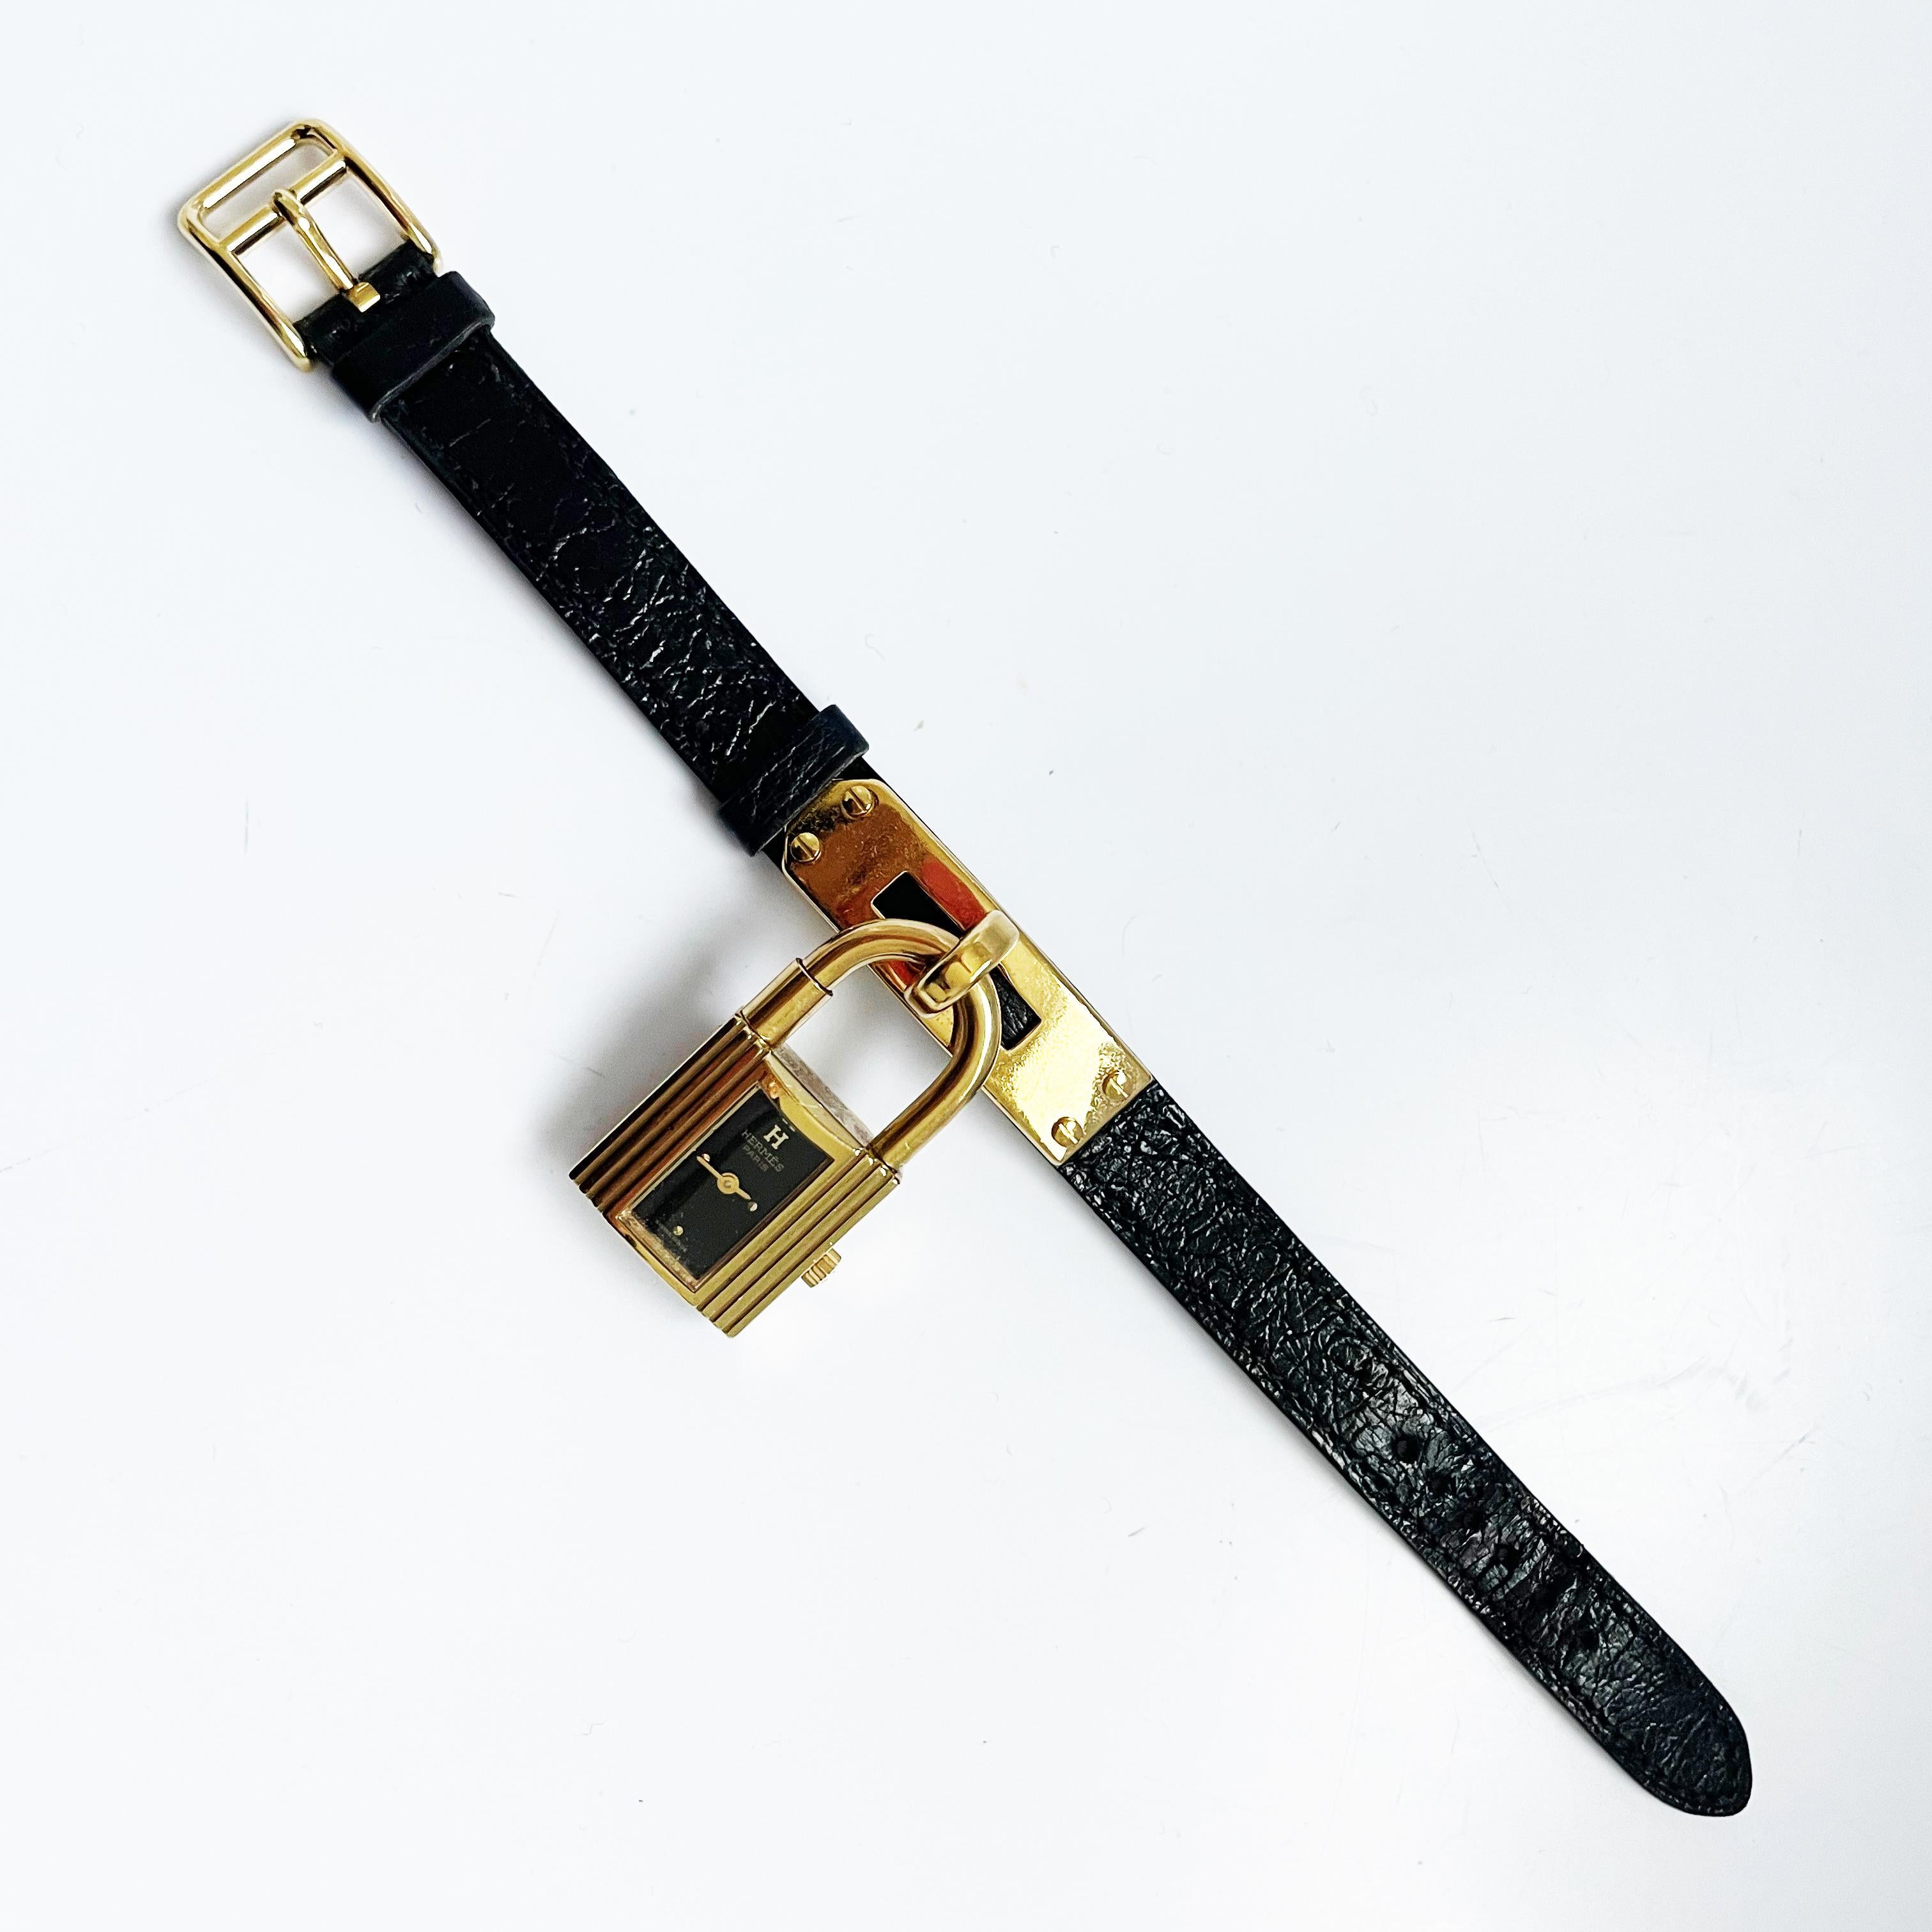 Authentic, preowned, vintage 90s Hermes Kelly cadena watch in gold metal with a black Chèvre Mysore leather strap.  Stamped T in a circle, indicating a 1990 year of production.  Iconic style with black watch face and Swiss movement.  

Remove the